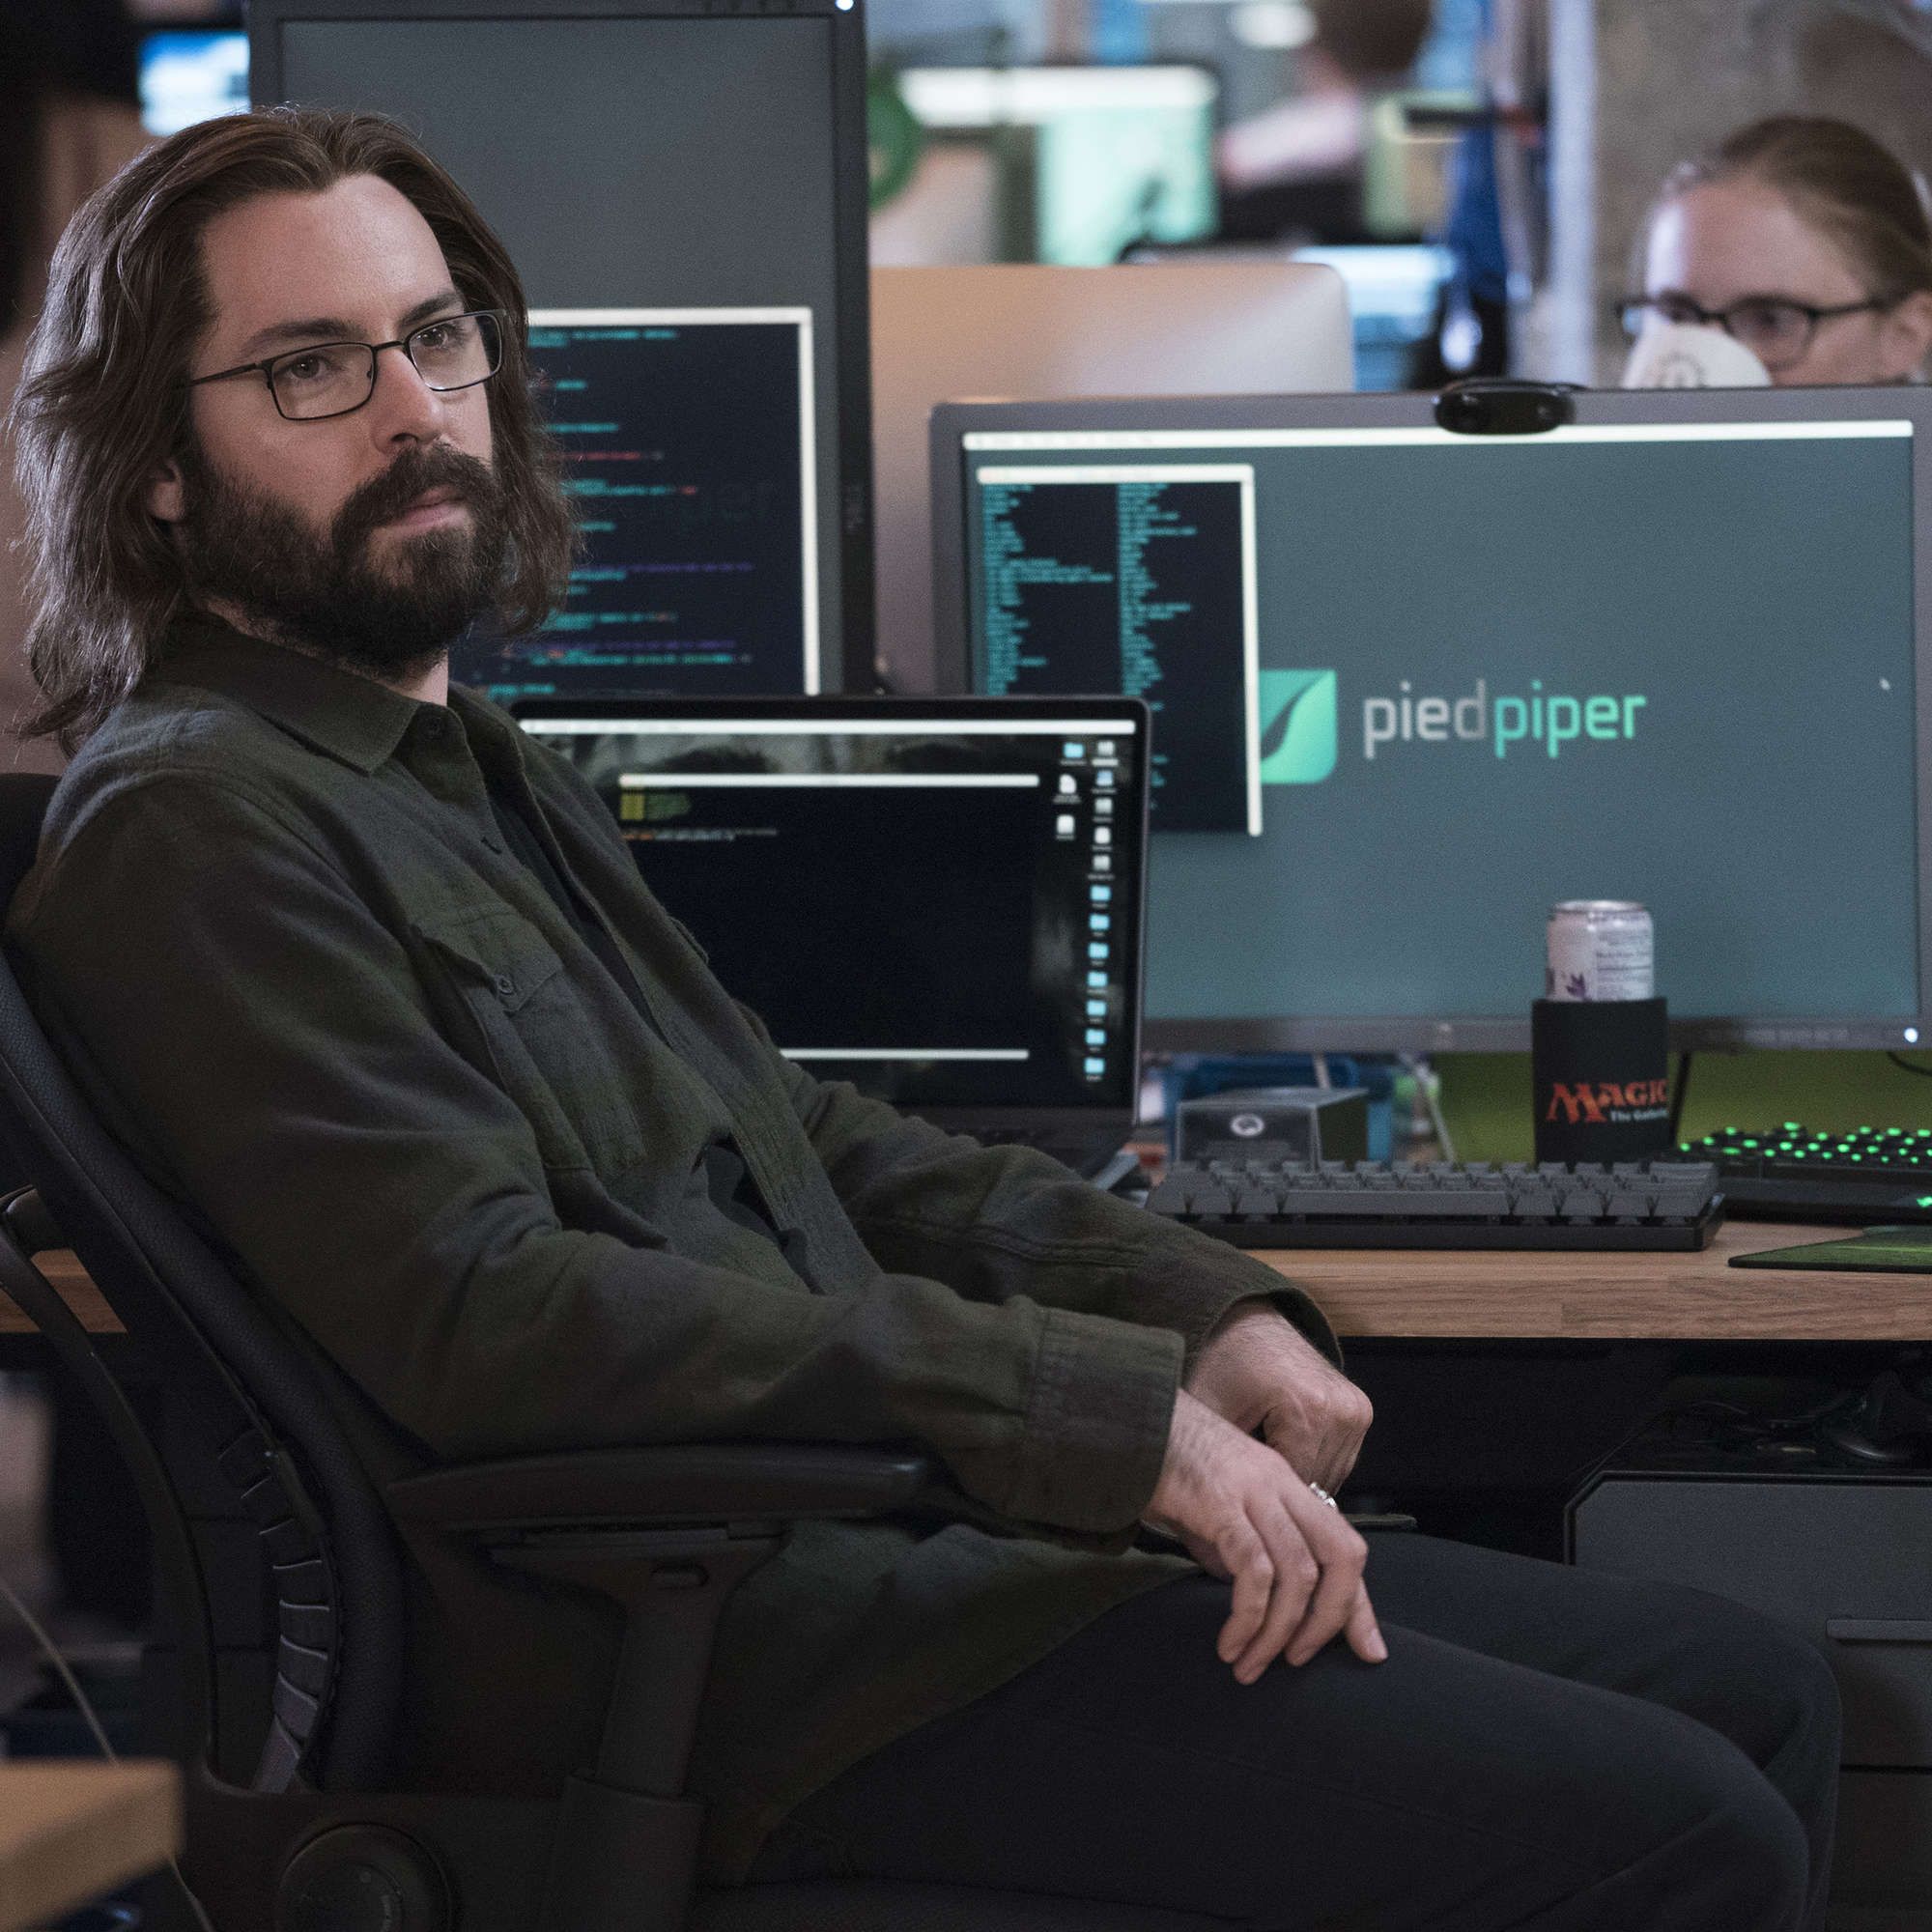 The 15 Best Gilfoyle Quotes on 'Silicon Valley'. Silicon valley hbo, Silicon valley quote, Silicon valley tv show